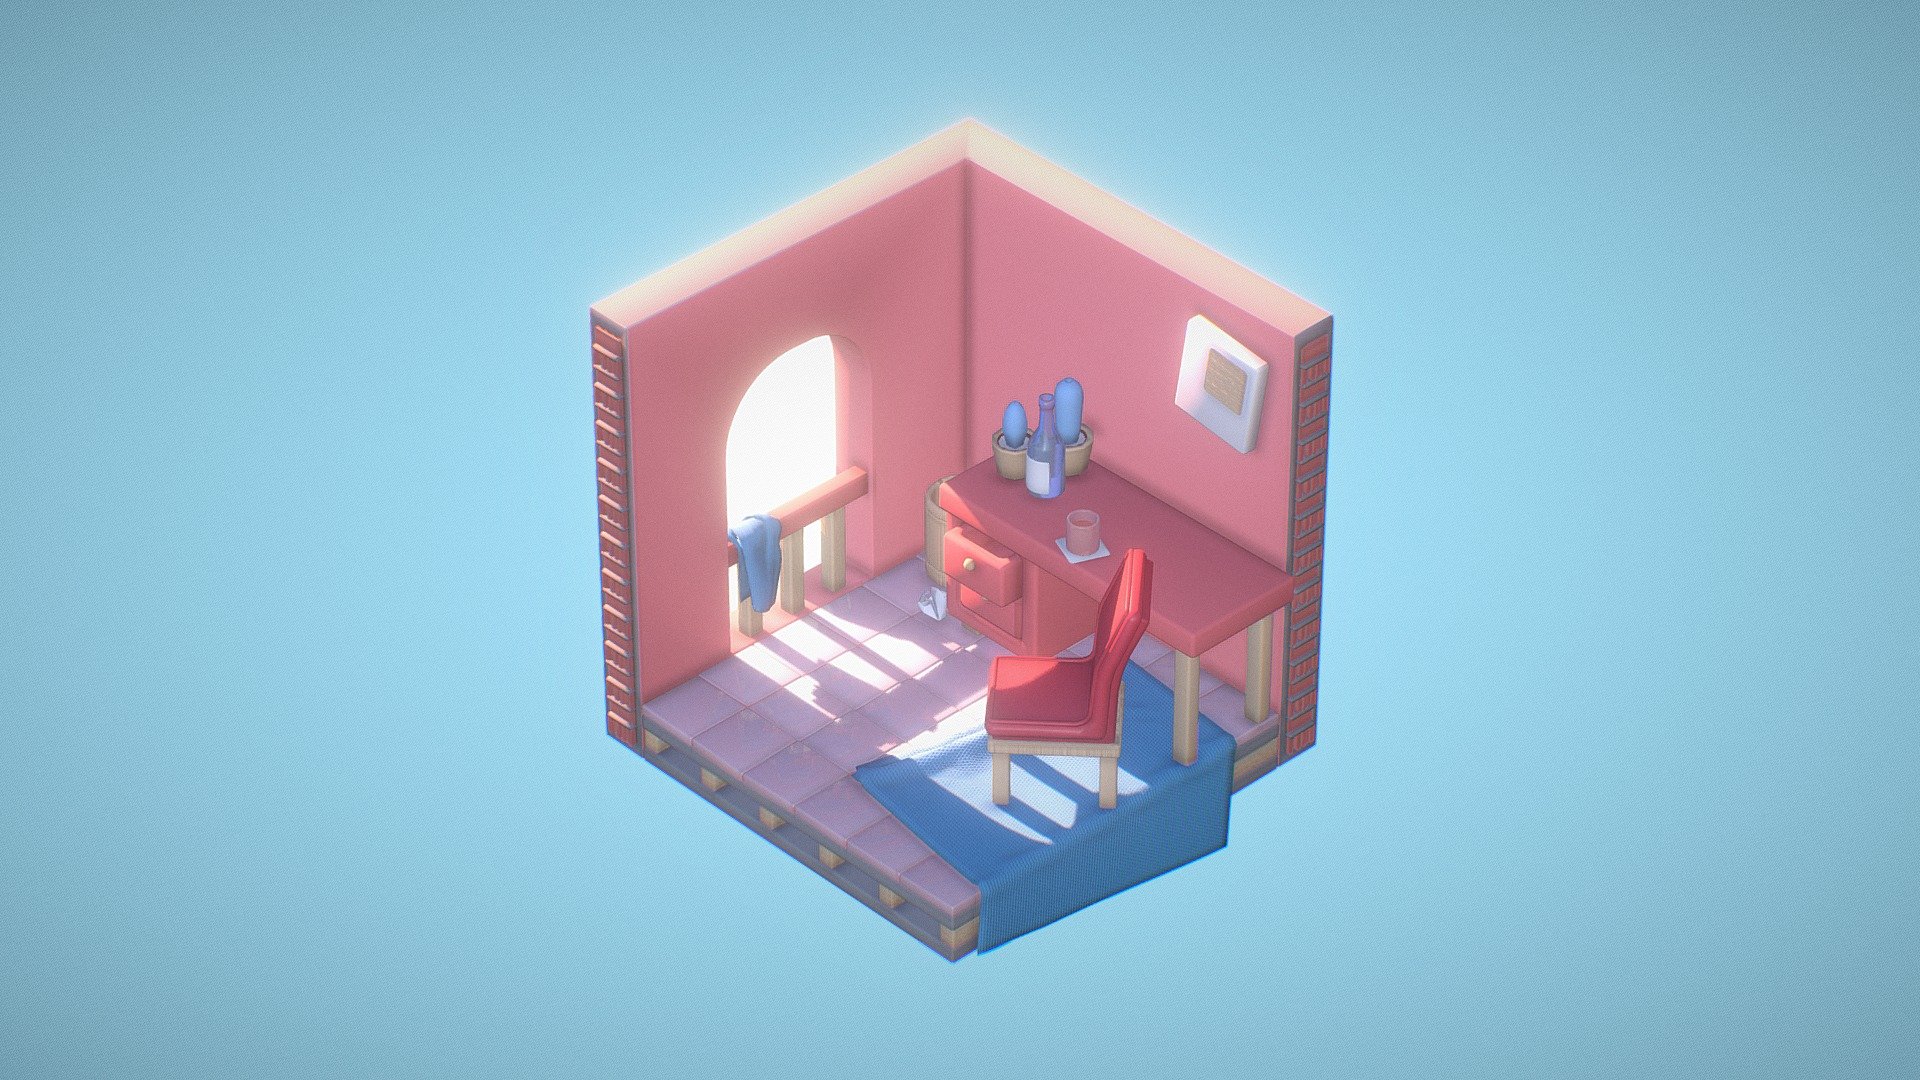 Pink isometric room inspired by La Muralla Roja apartments in Spain, but with a round arch instead of straight ones 3d model